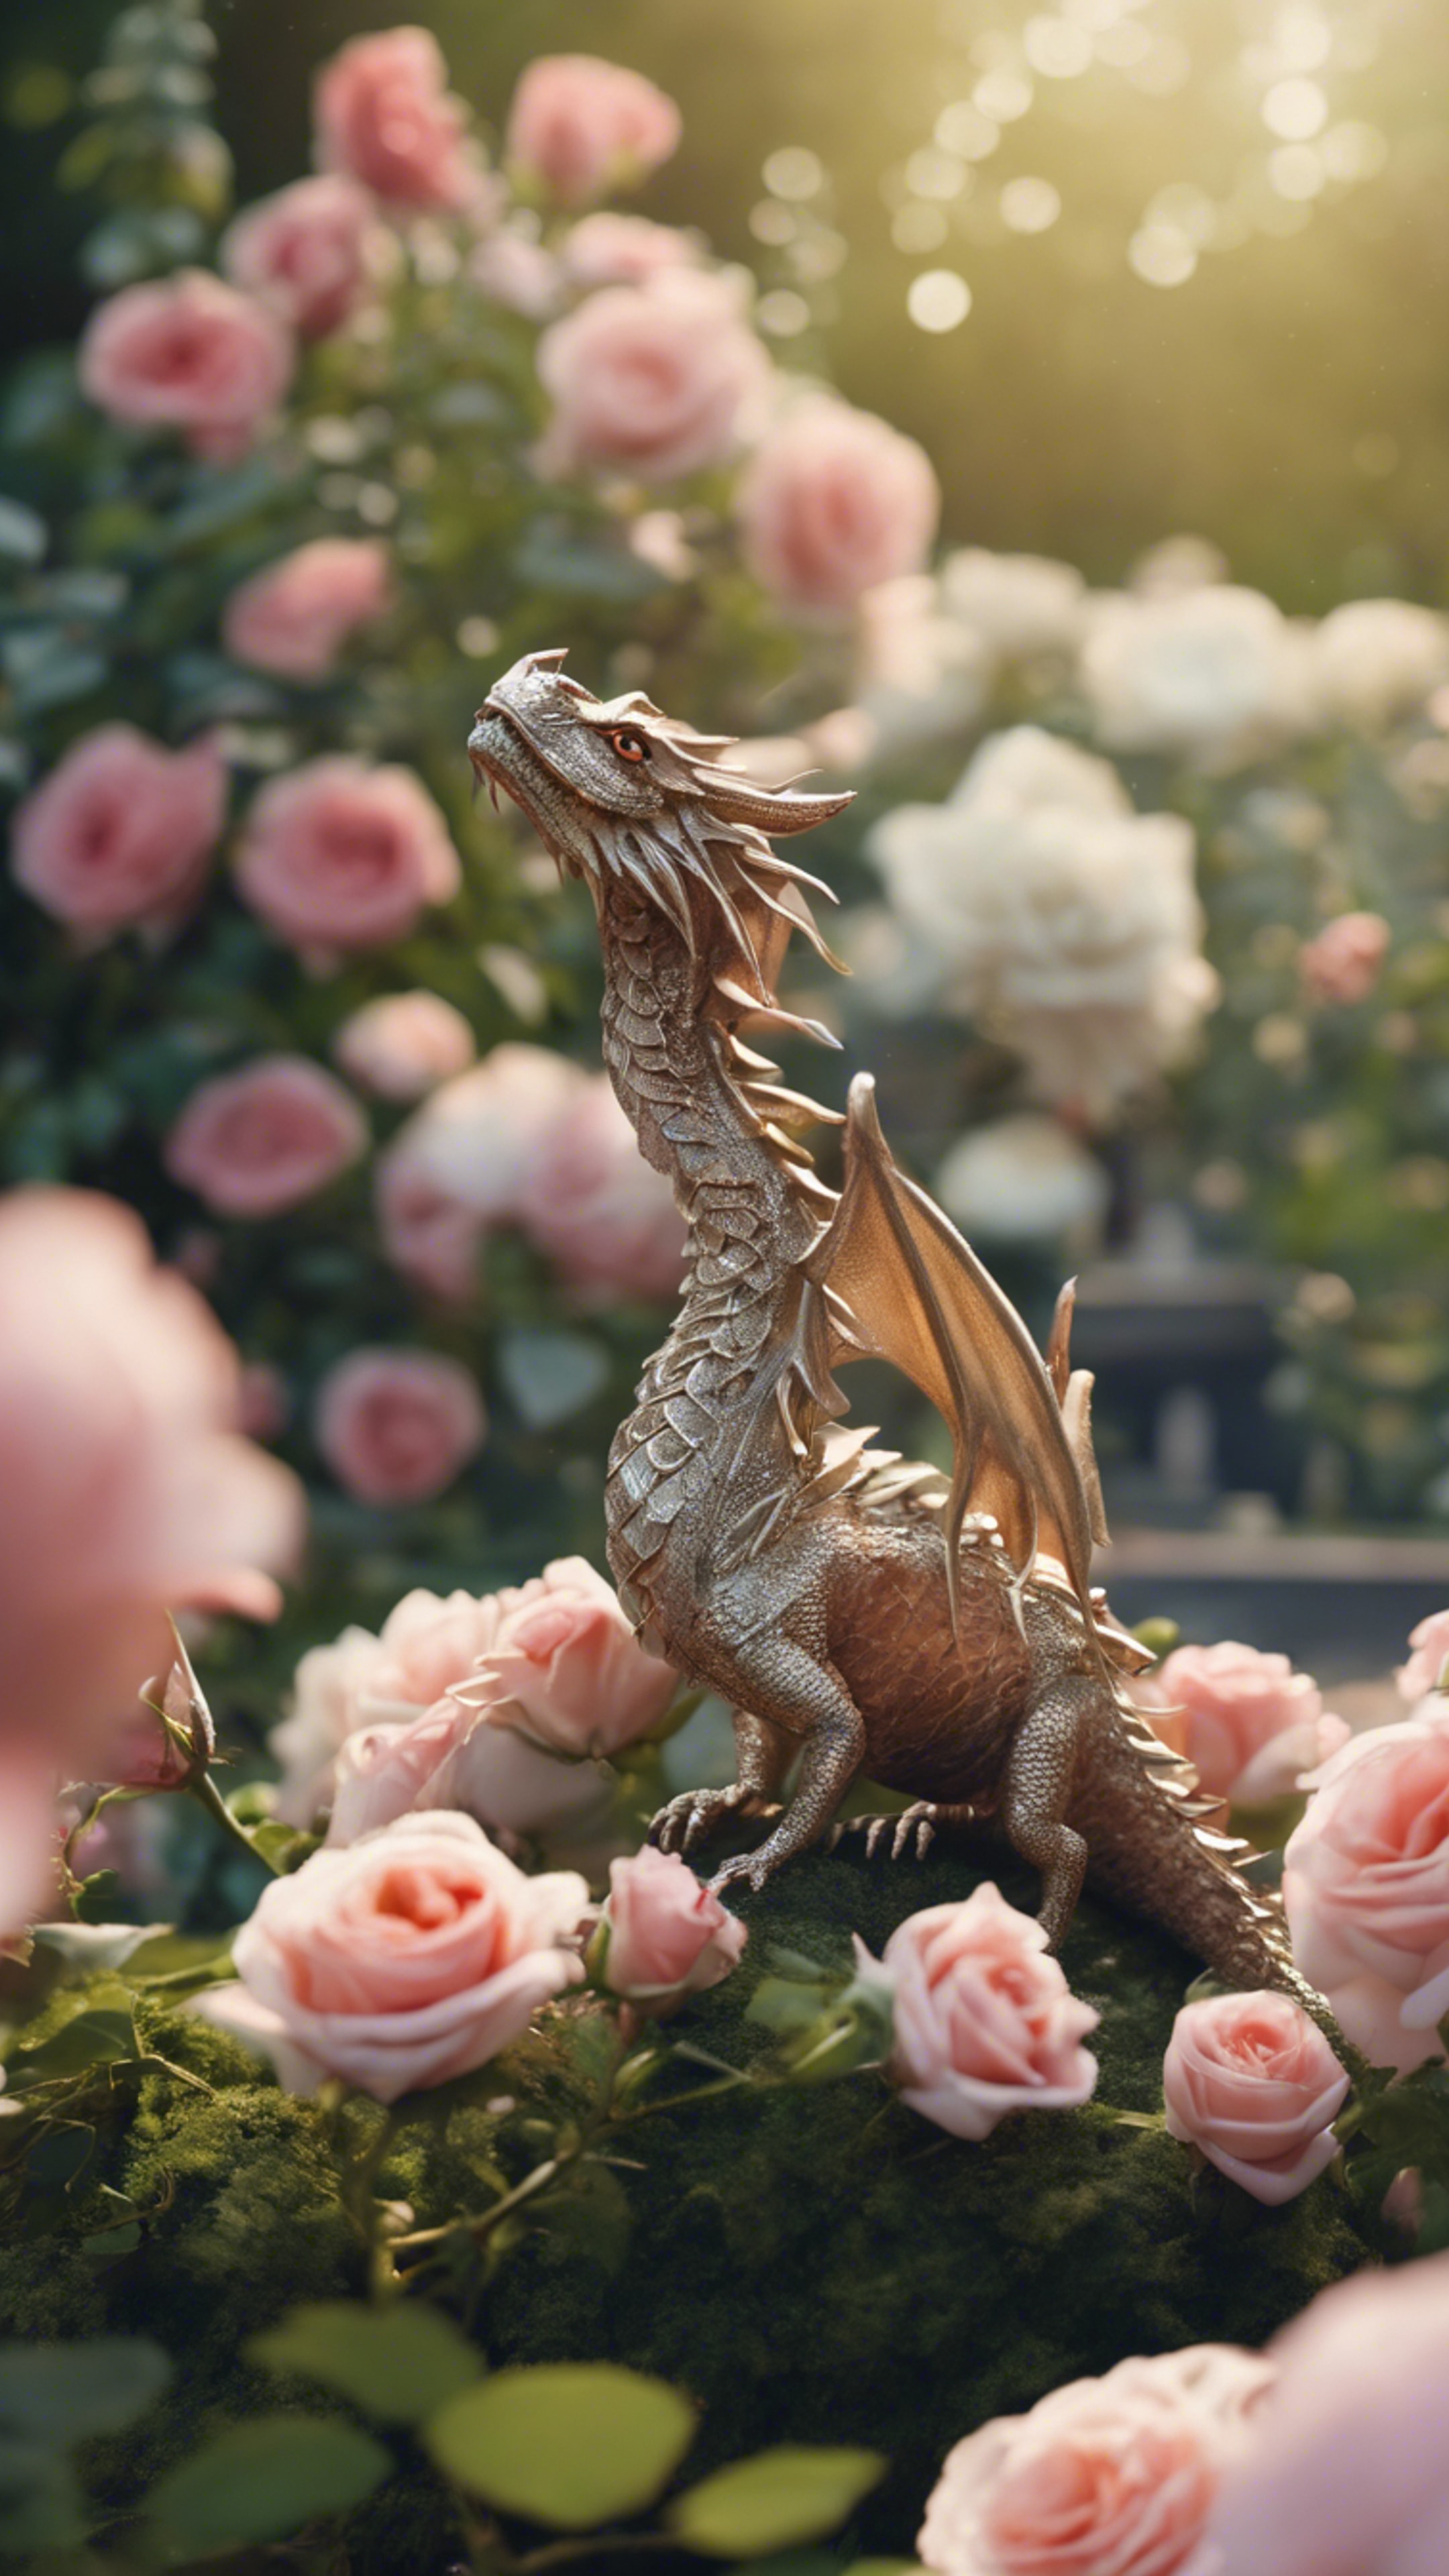 A peaceful garden scene with a tiny, delicate dragon hovering over blooming roses. Tapetai[938d180fa7284dedb4af]